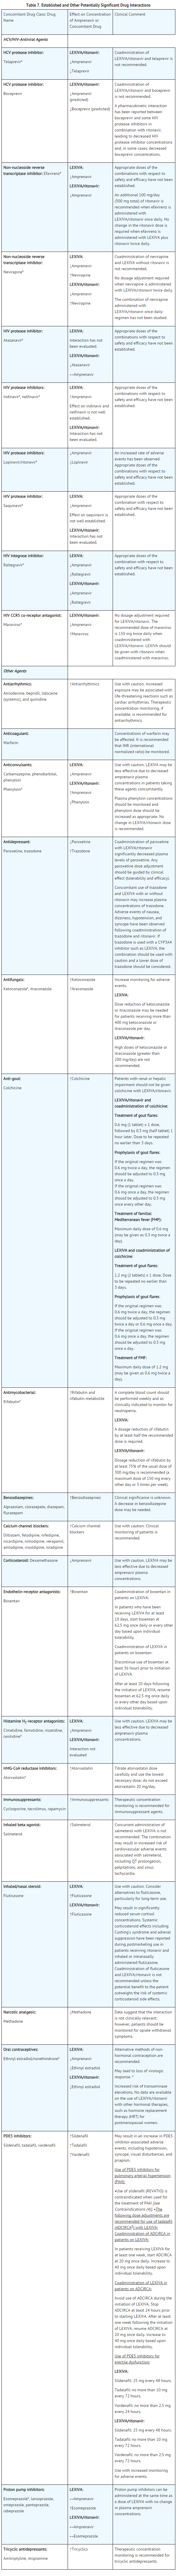 File:Fos 05 Drug Interactions.png